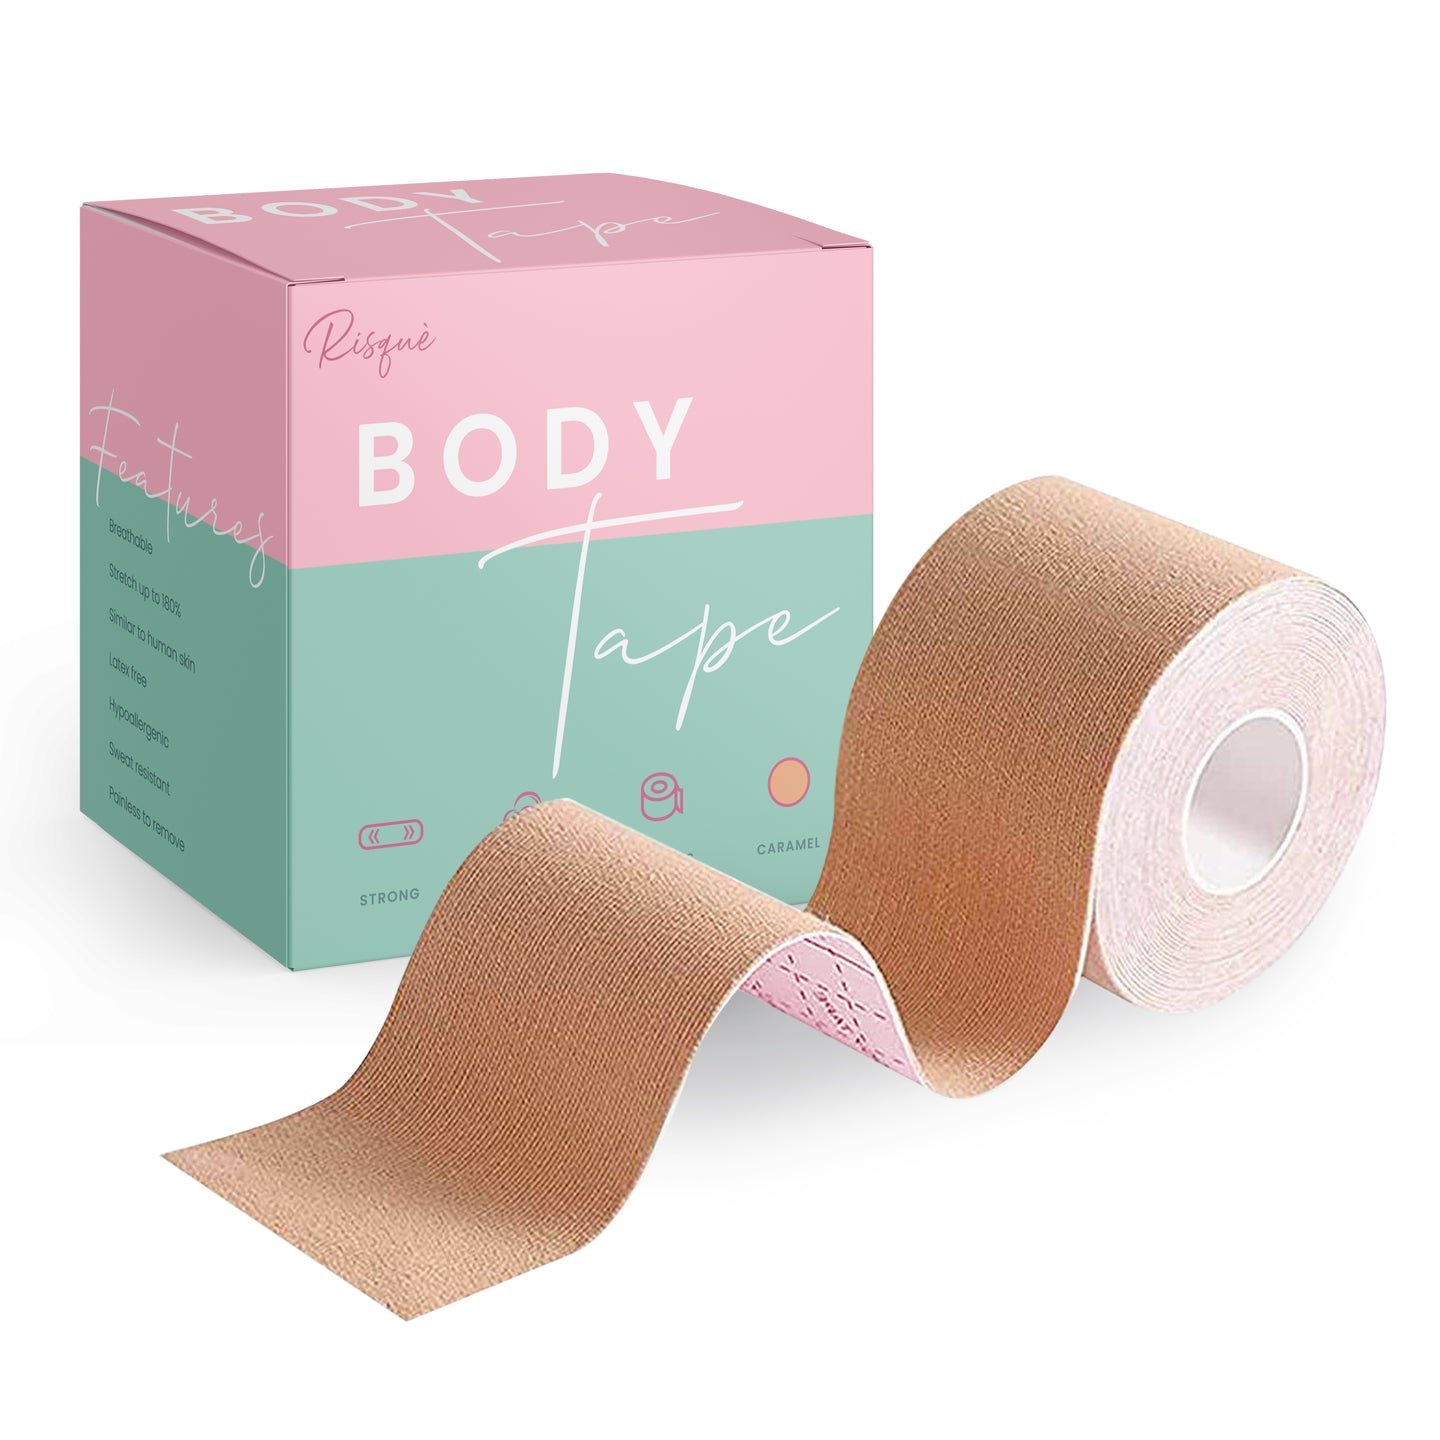 My favorite boob tape brand finally brought out reusable nipple